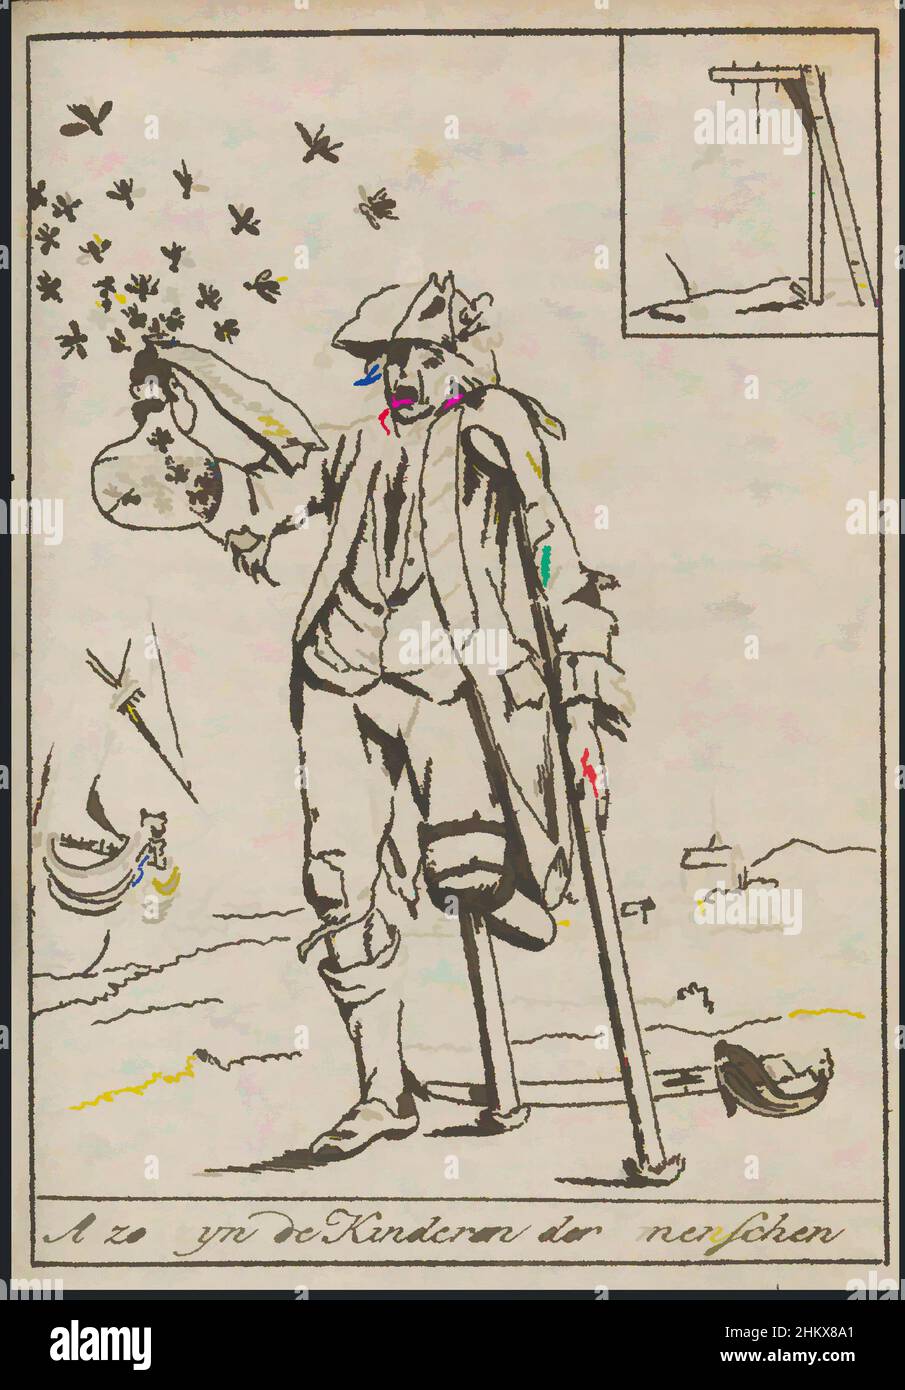 Art inspired by Cripple with fly-poison, 1796, Such are the children of men!, cartoon of disabled man with wooden leg and crutches holding up a bottle of fly poison which is attracting a swarm of flies. Illustration in Pieter van Woensel's almanac 'De Lantaarn for 1796'., print maker, Classic works modernized by Artotop with a splash of modernity. Shapes, color and value, eye-catching visual impact on art. Emotions through freedom of artworks in a contemporary way. A timeless message pursuing a wildly creative new direction. Artists turning to the digital medium and creating the Artotop NFT Stock Photo